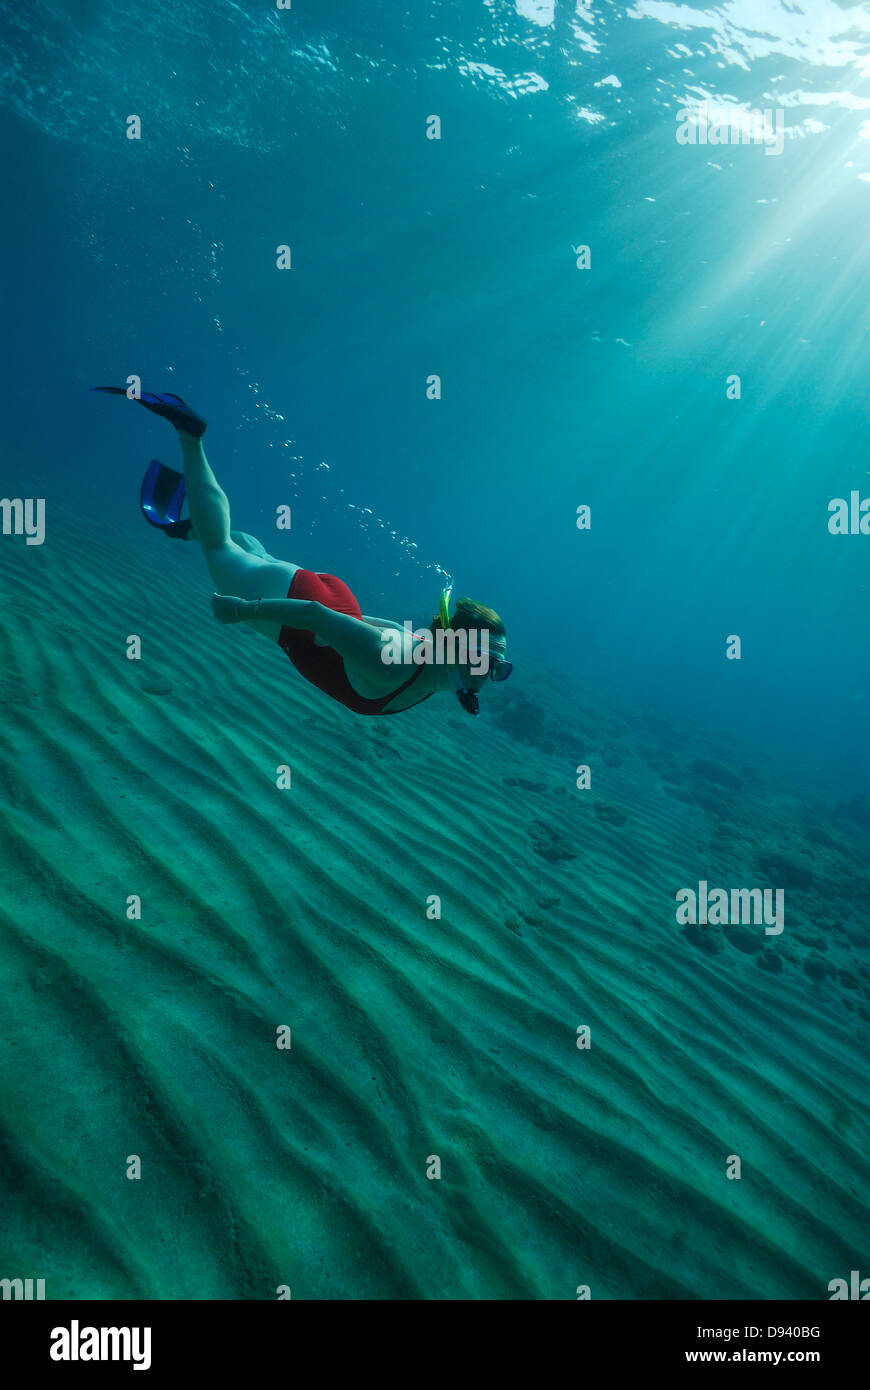 Woman free diving under sea Stock Photo